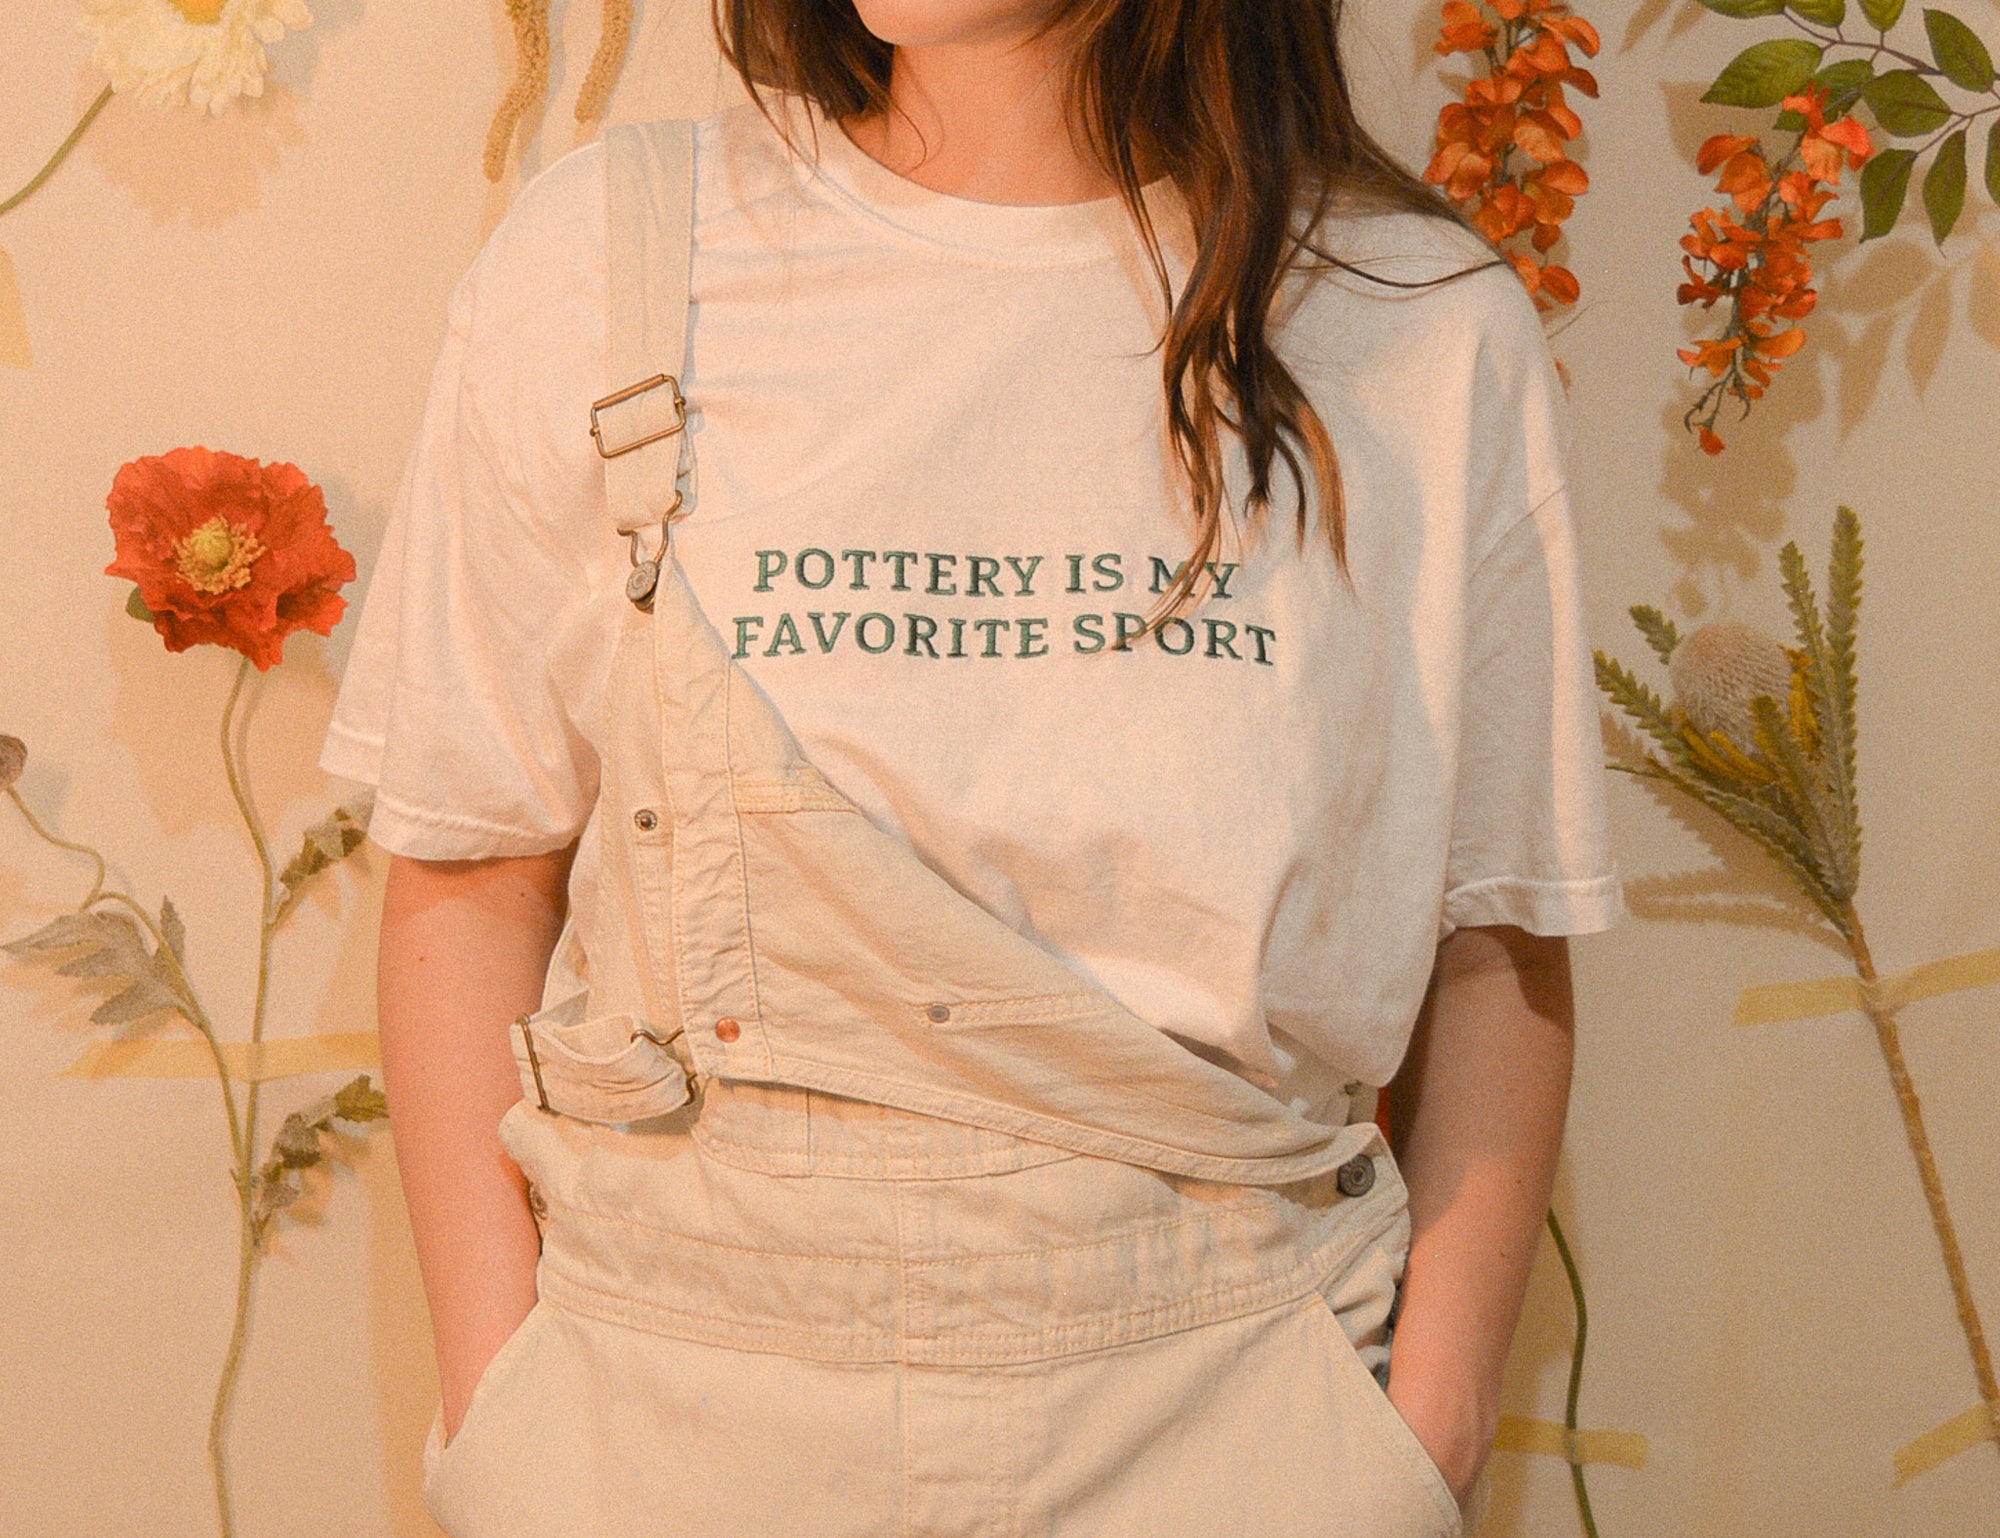 Pottery Is My Favorite Sport Shirt - White